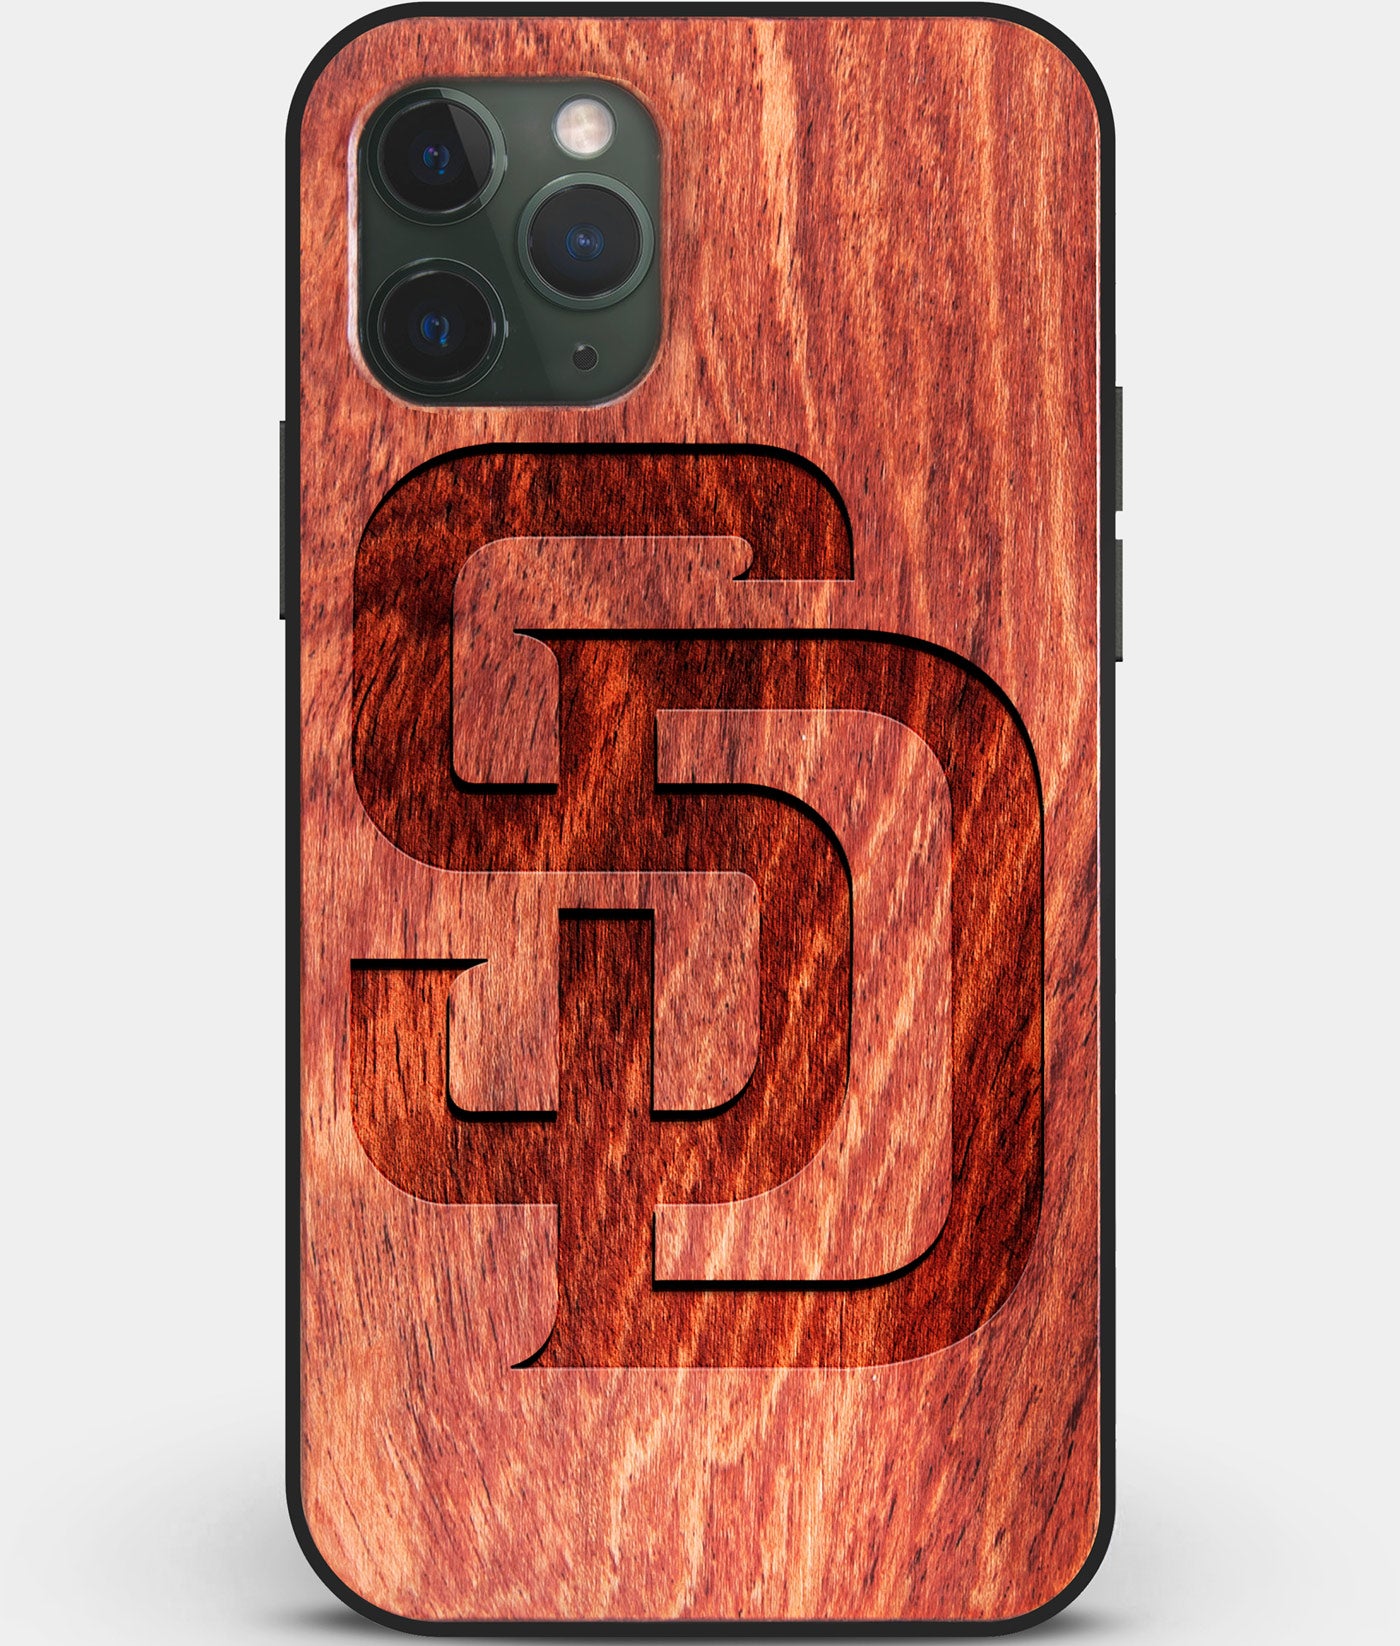 Custom Carved Wood San Diego Padres iPhone 11 Pro Case | Personalized Mahogany Wood San Diego Padres Cover, Birthday Gift, Gifts For Him, Monogrammed Gift For Fan | by Engraved In Nature